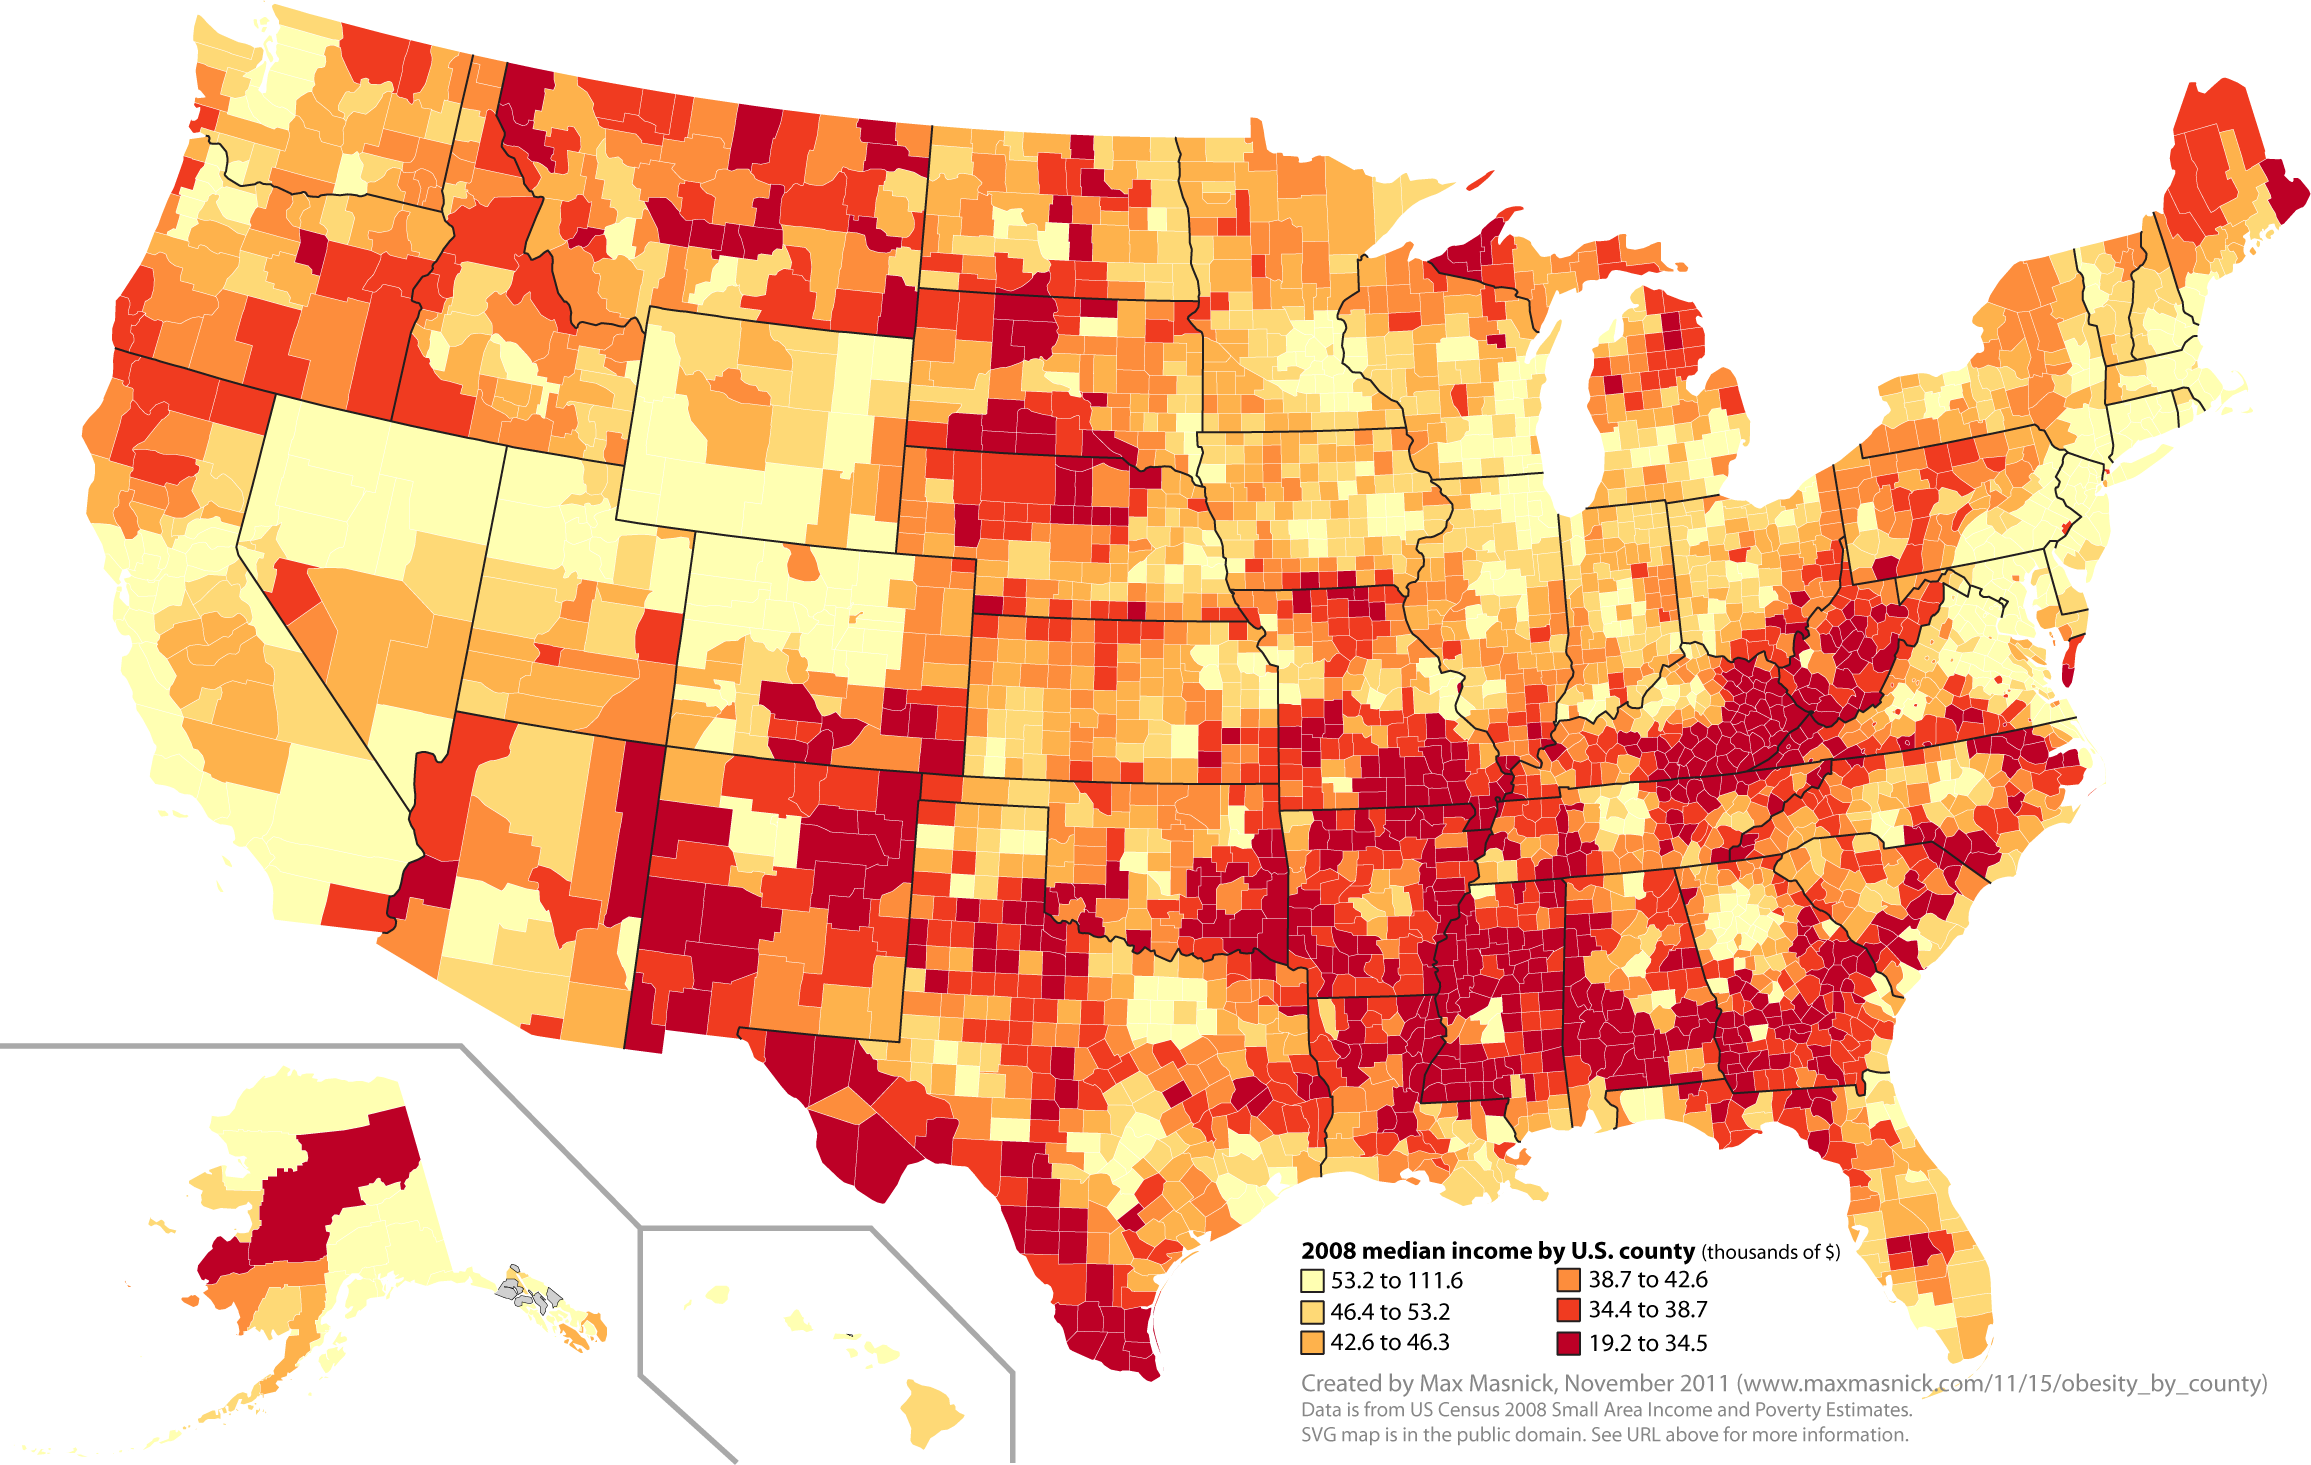 income_by_county_large.png